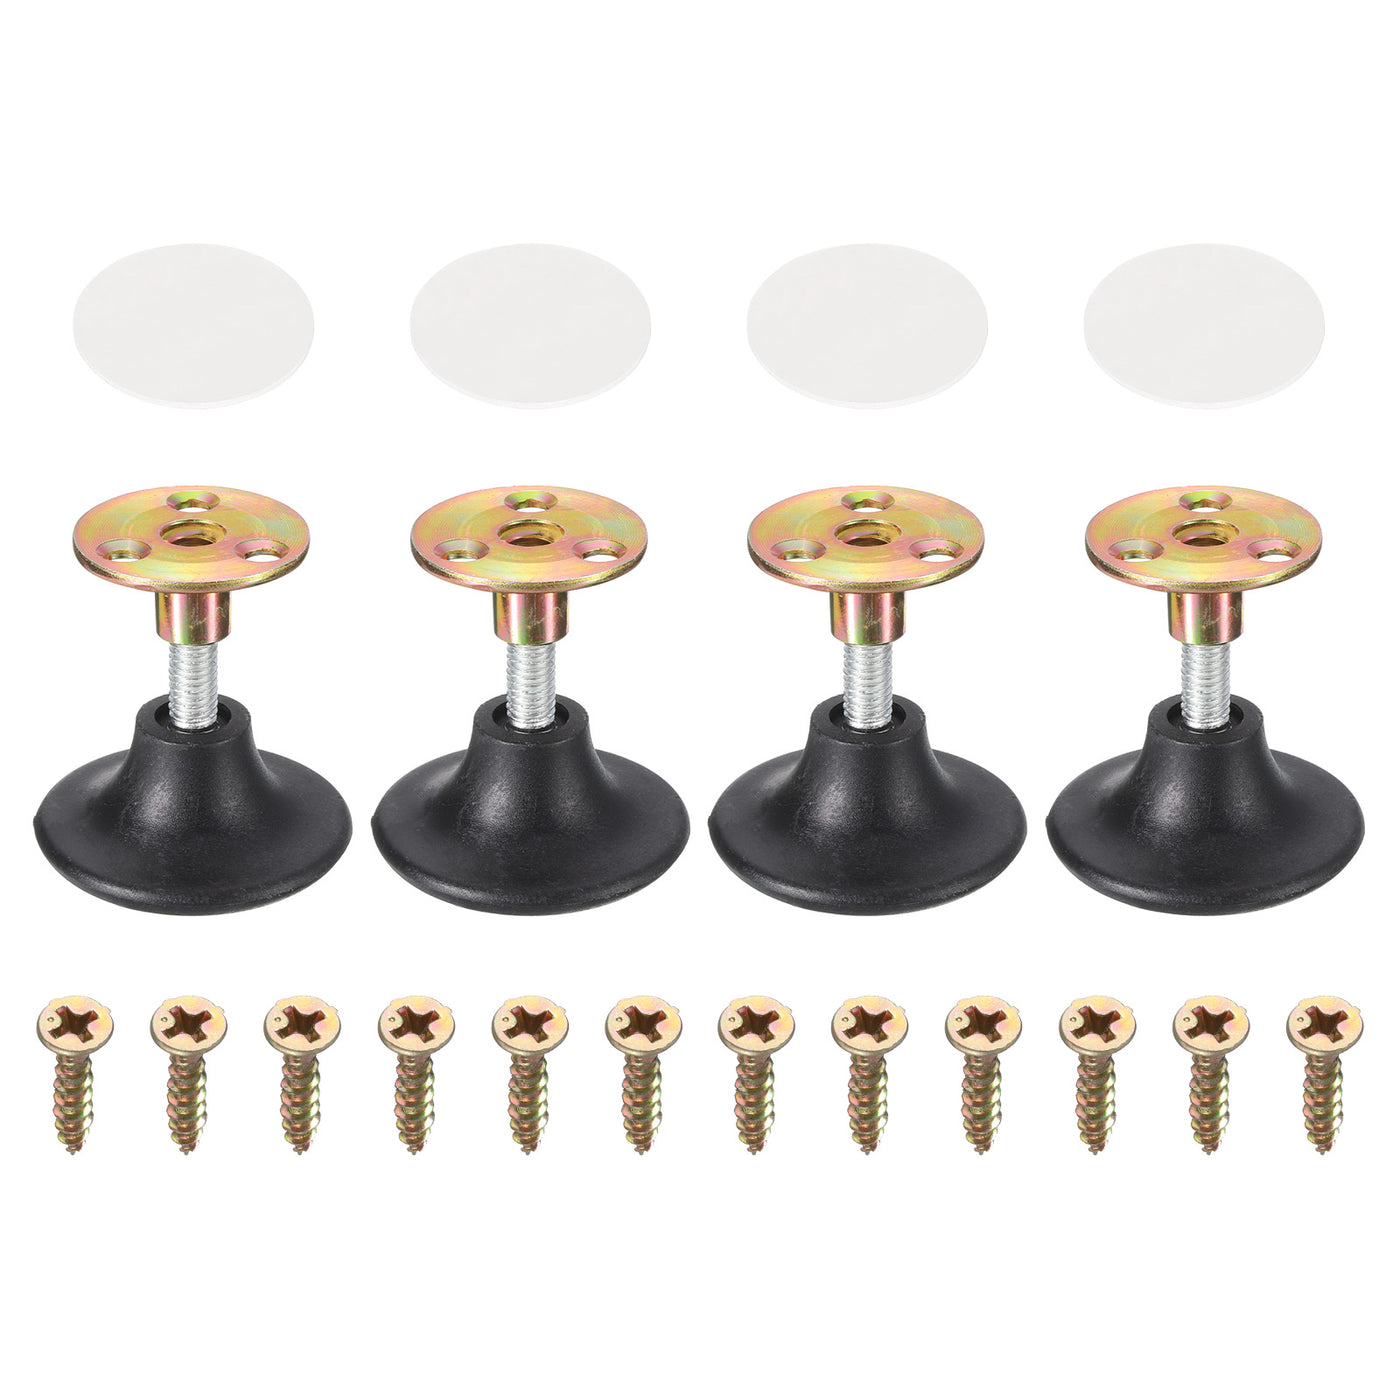 uxcell Uxcell Thread Furniture Leveling Feet, 4Pcs - Adjustable Furniture Feet Levelers, Self-adhesive Threaded Screw-in Raised Base for Tables Sofas (50 x 24 MM)